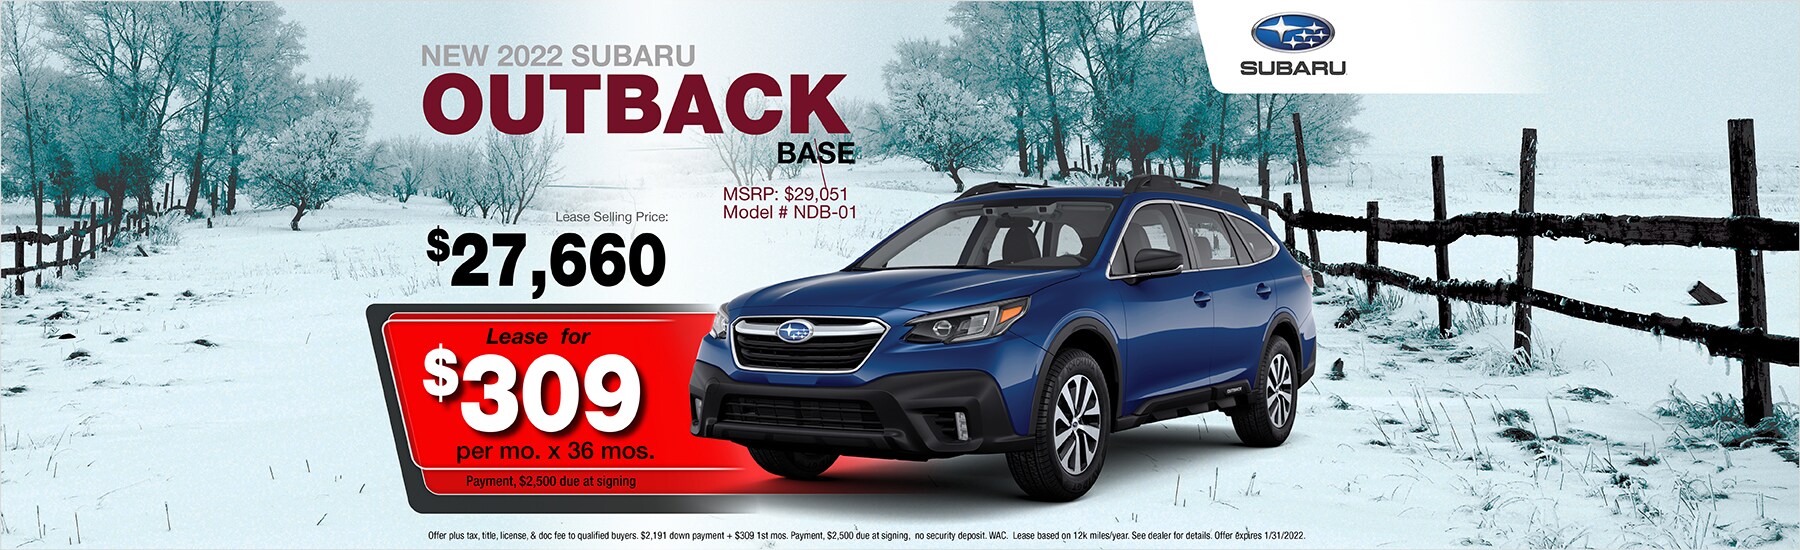 Lease a 2022 Subaru Outback for $309 per month for 36 months with $2,500 due at signing - lease selling price: $27,660 - MSRP $29,051 - Model NDB-01